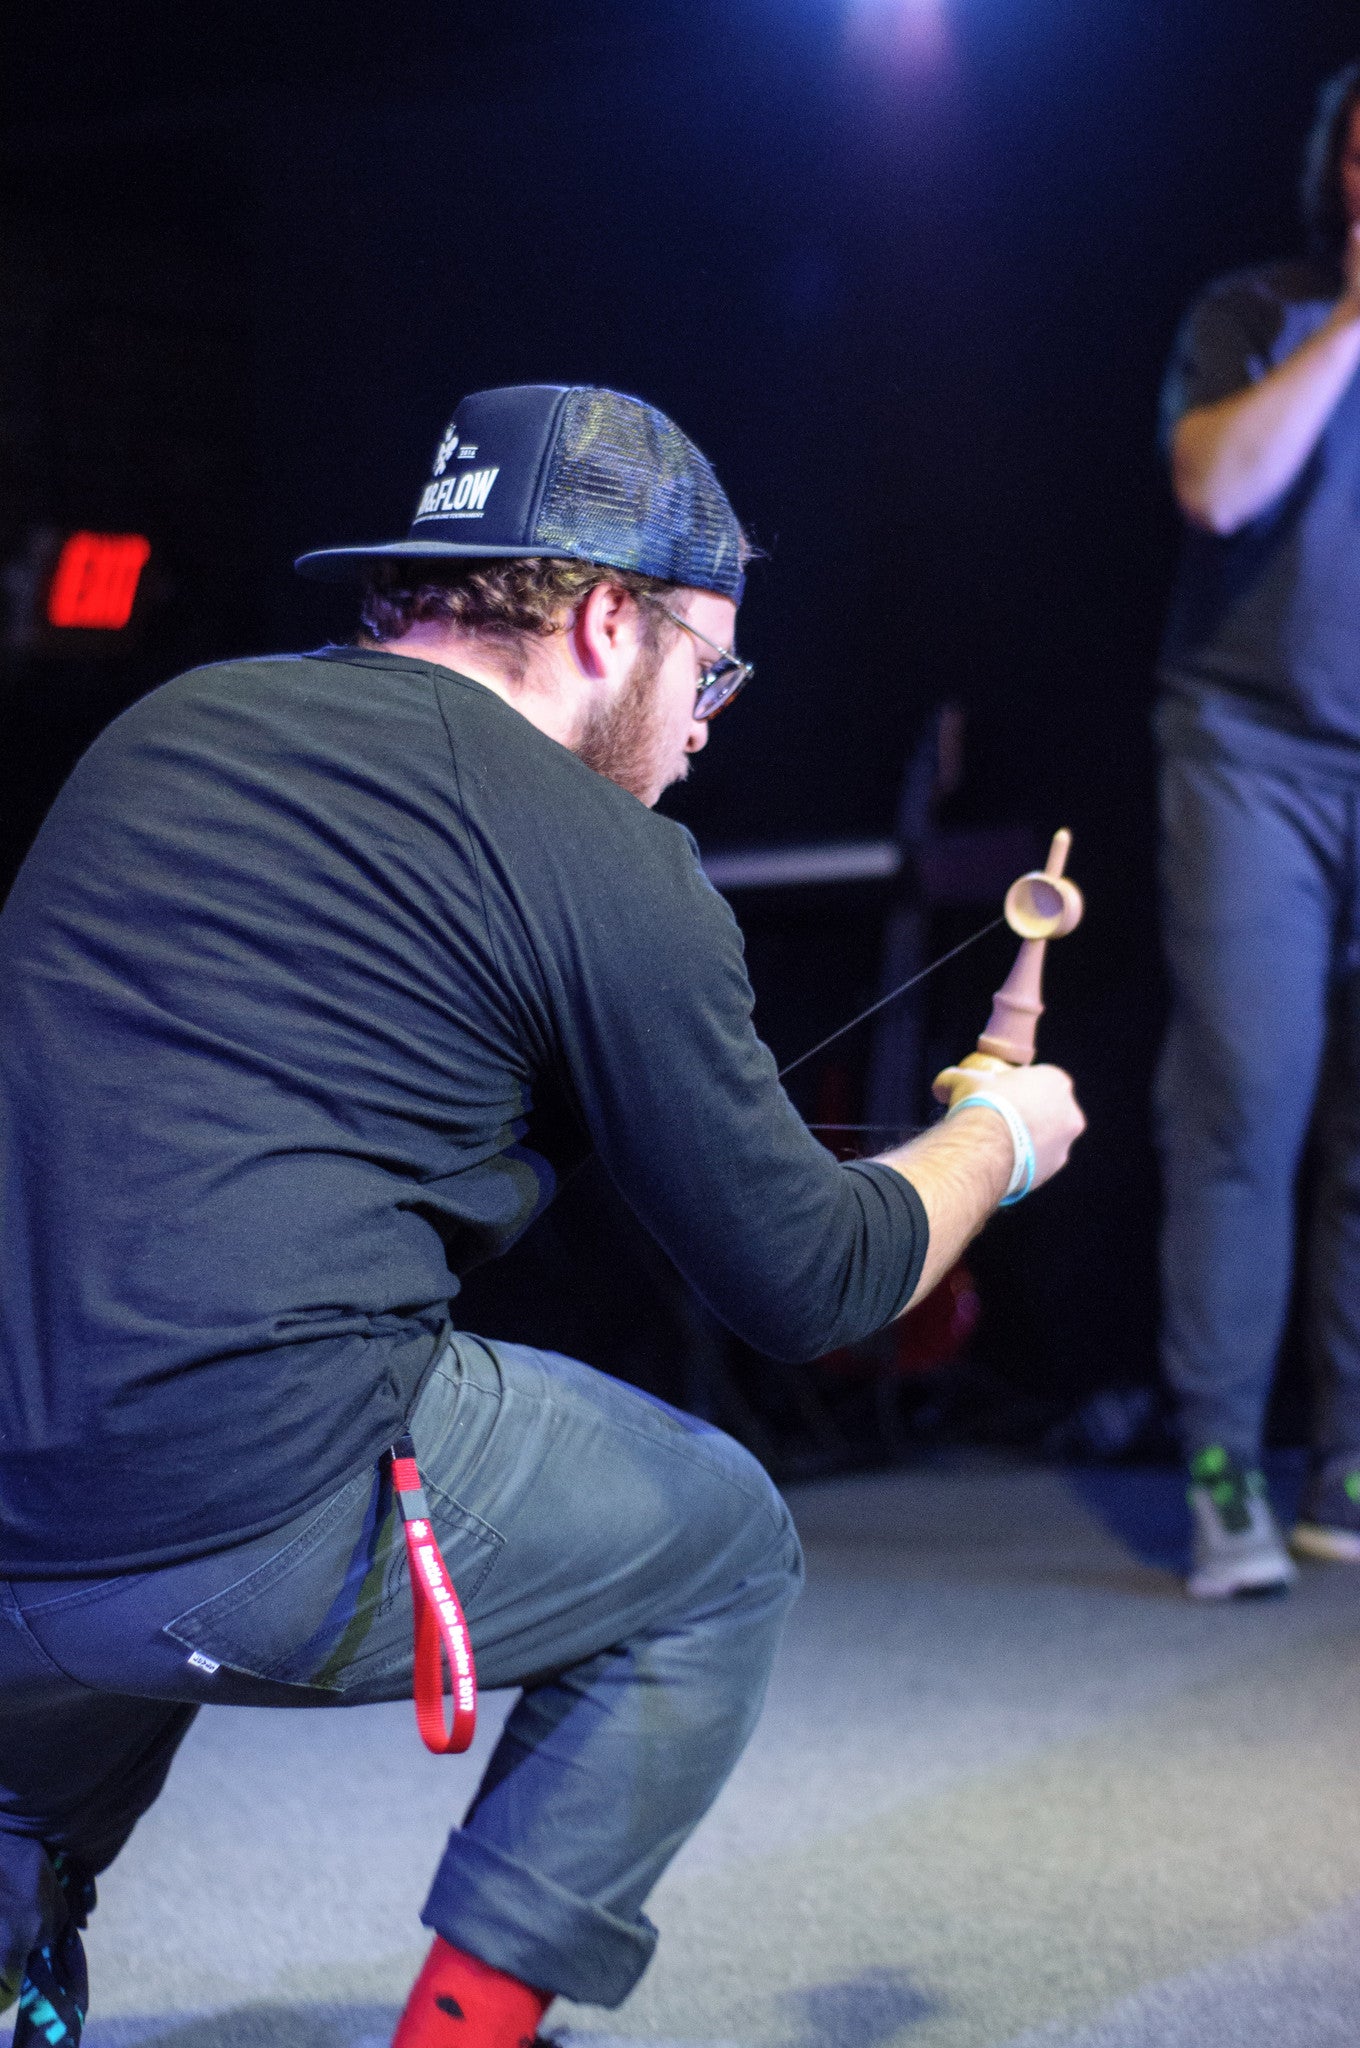 Why You Should Go to Kendama Events